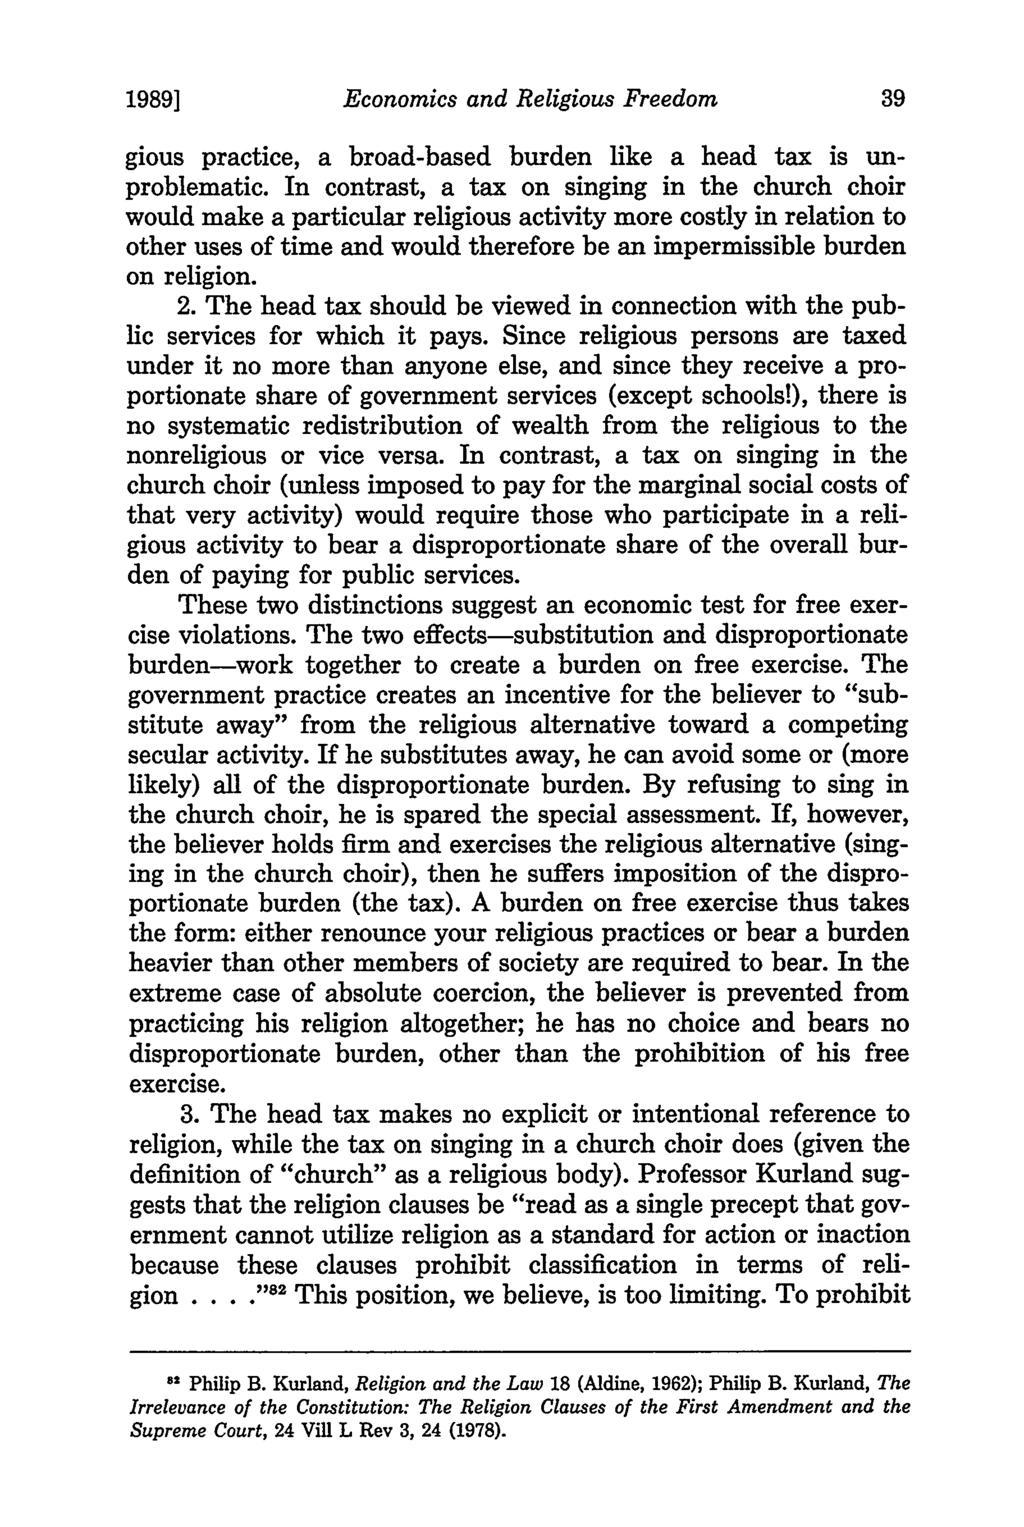 1989] Economics and Religious Freedom gious practice, a broad-based burden like a head tax is unproblematic.